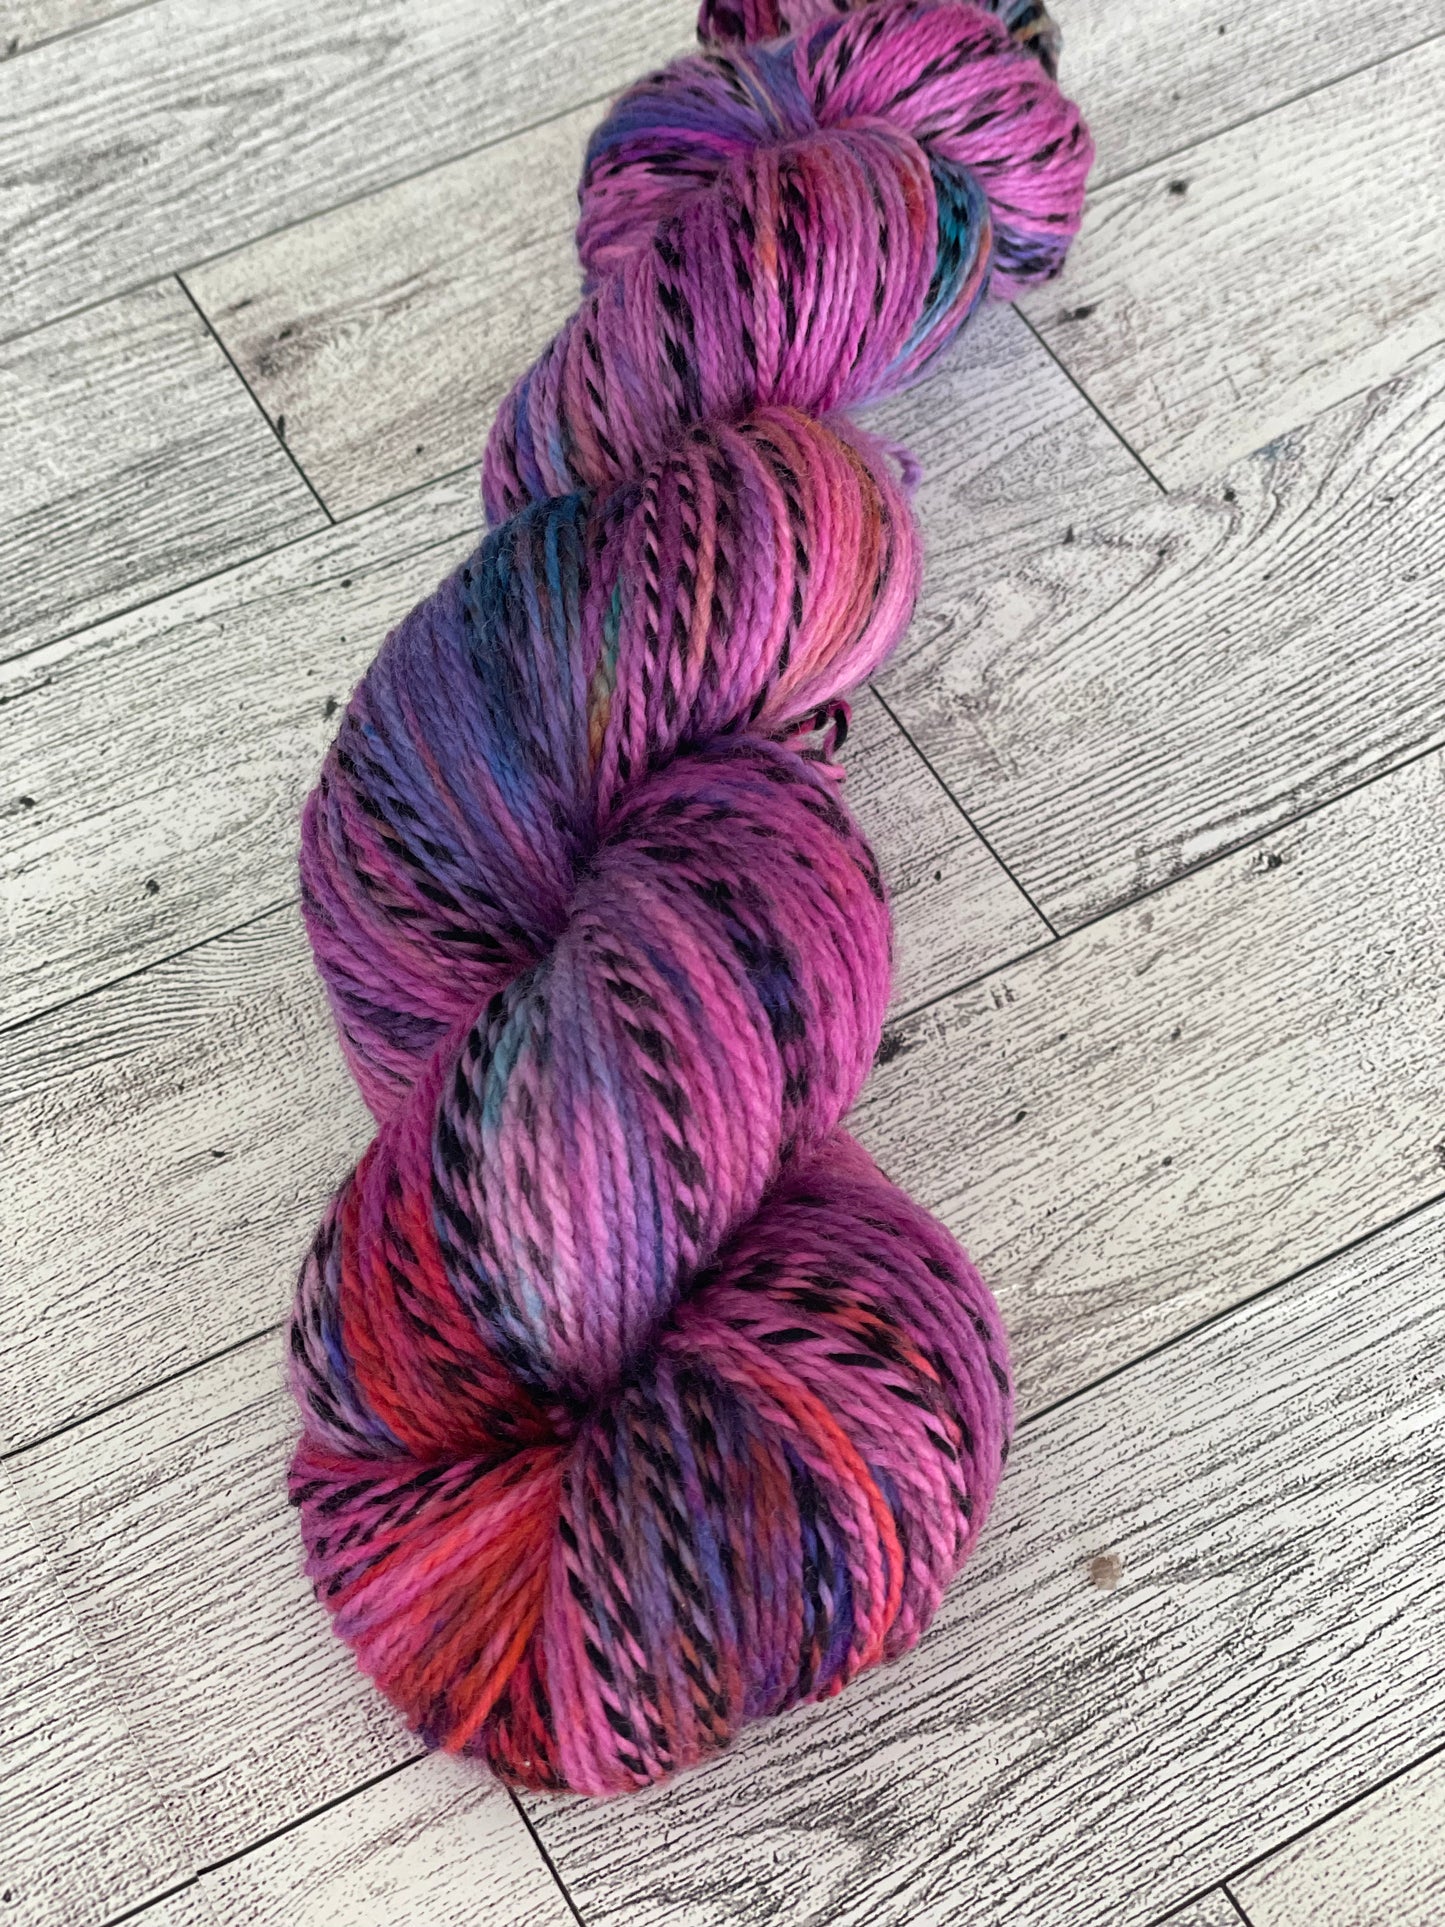 Troll Hair Don’t Care - Twisted - Hand Dyed Sock Yarn